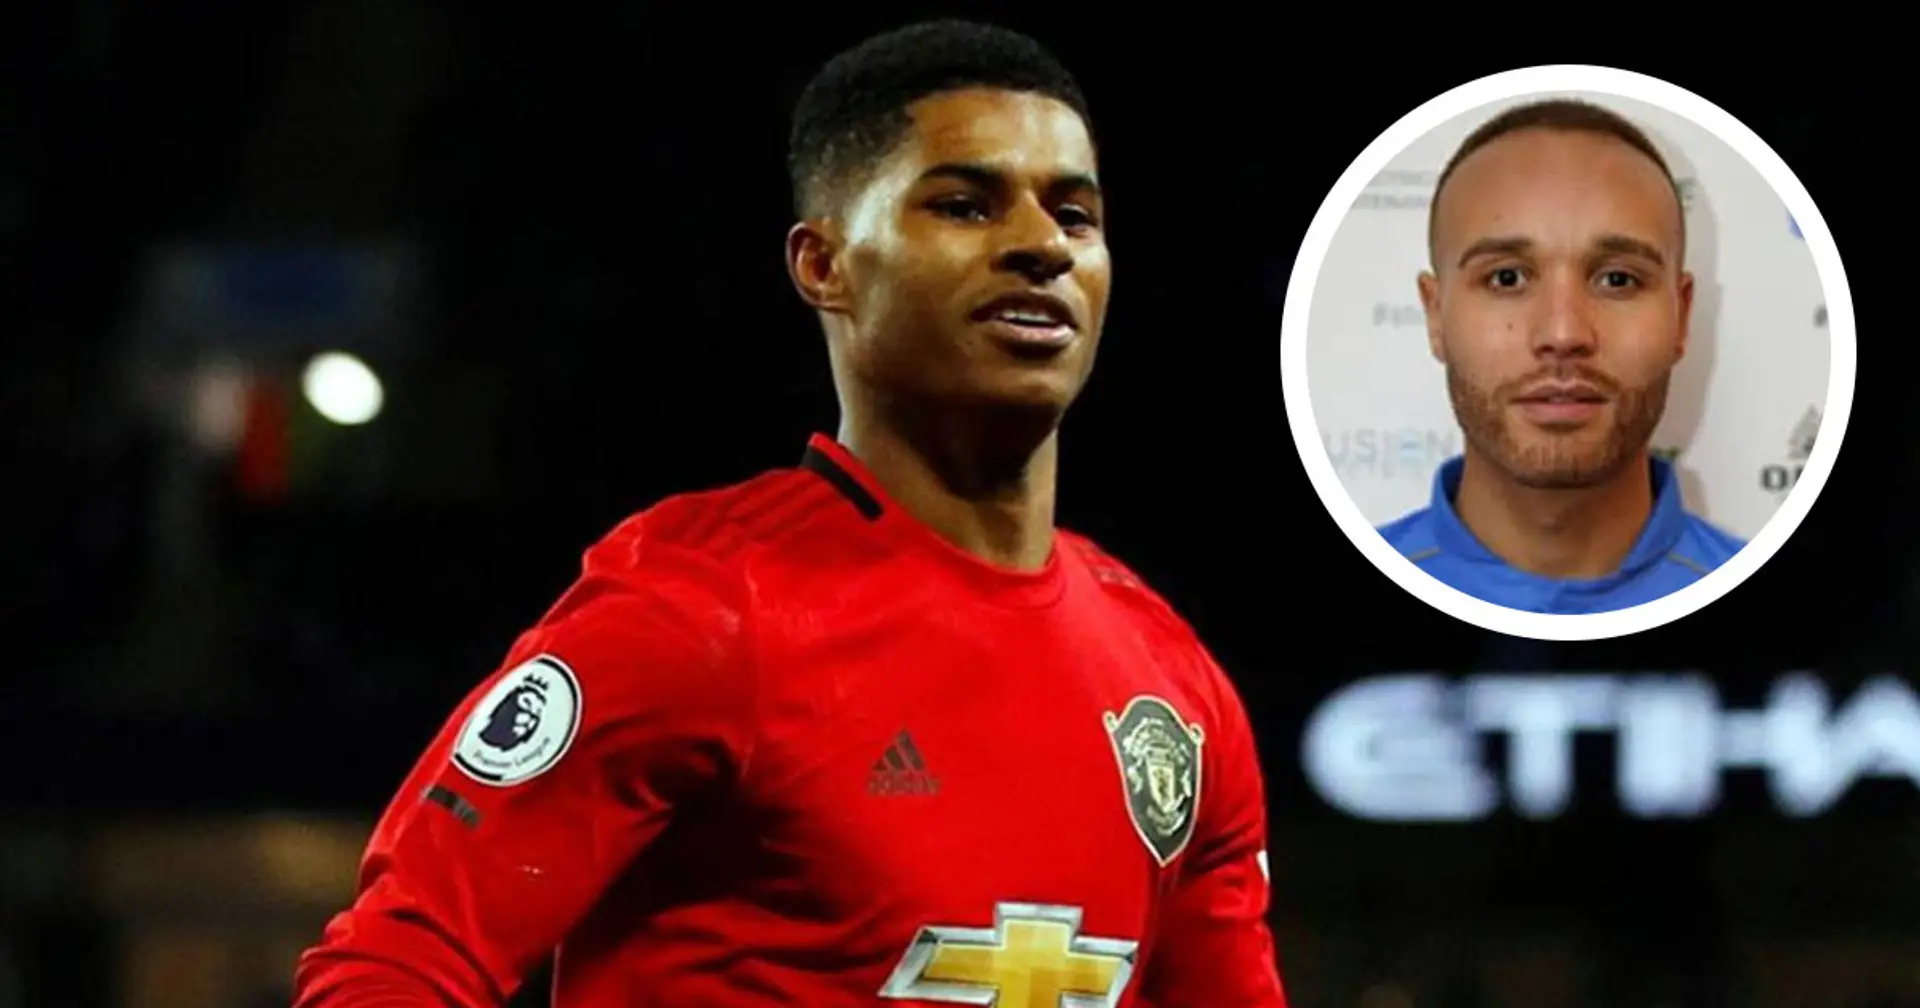 ‘He’s always the kind of person trying to make a change’: Rashford’s cousin reveals his family’s pride for his charity efforts